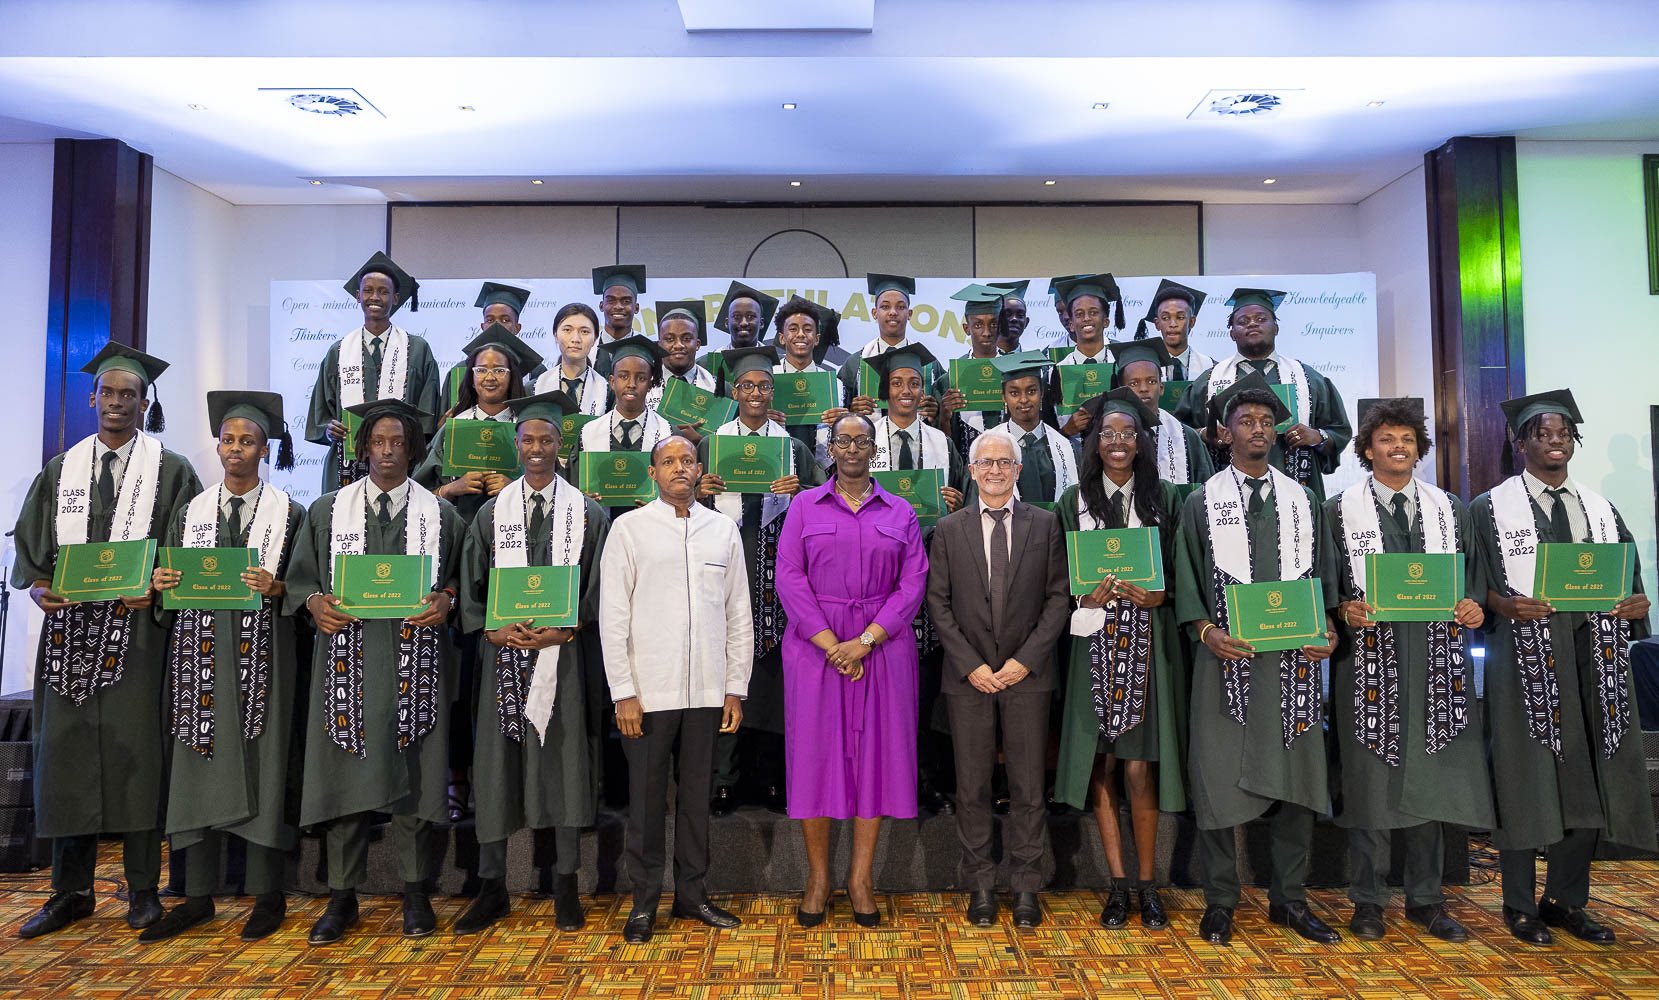 First Lady Jeannette Kagame with students in a group photo  during a graduation ceremony of Green Hills Academy students in Kigali on Saturday, June 11. Courtesy